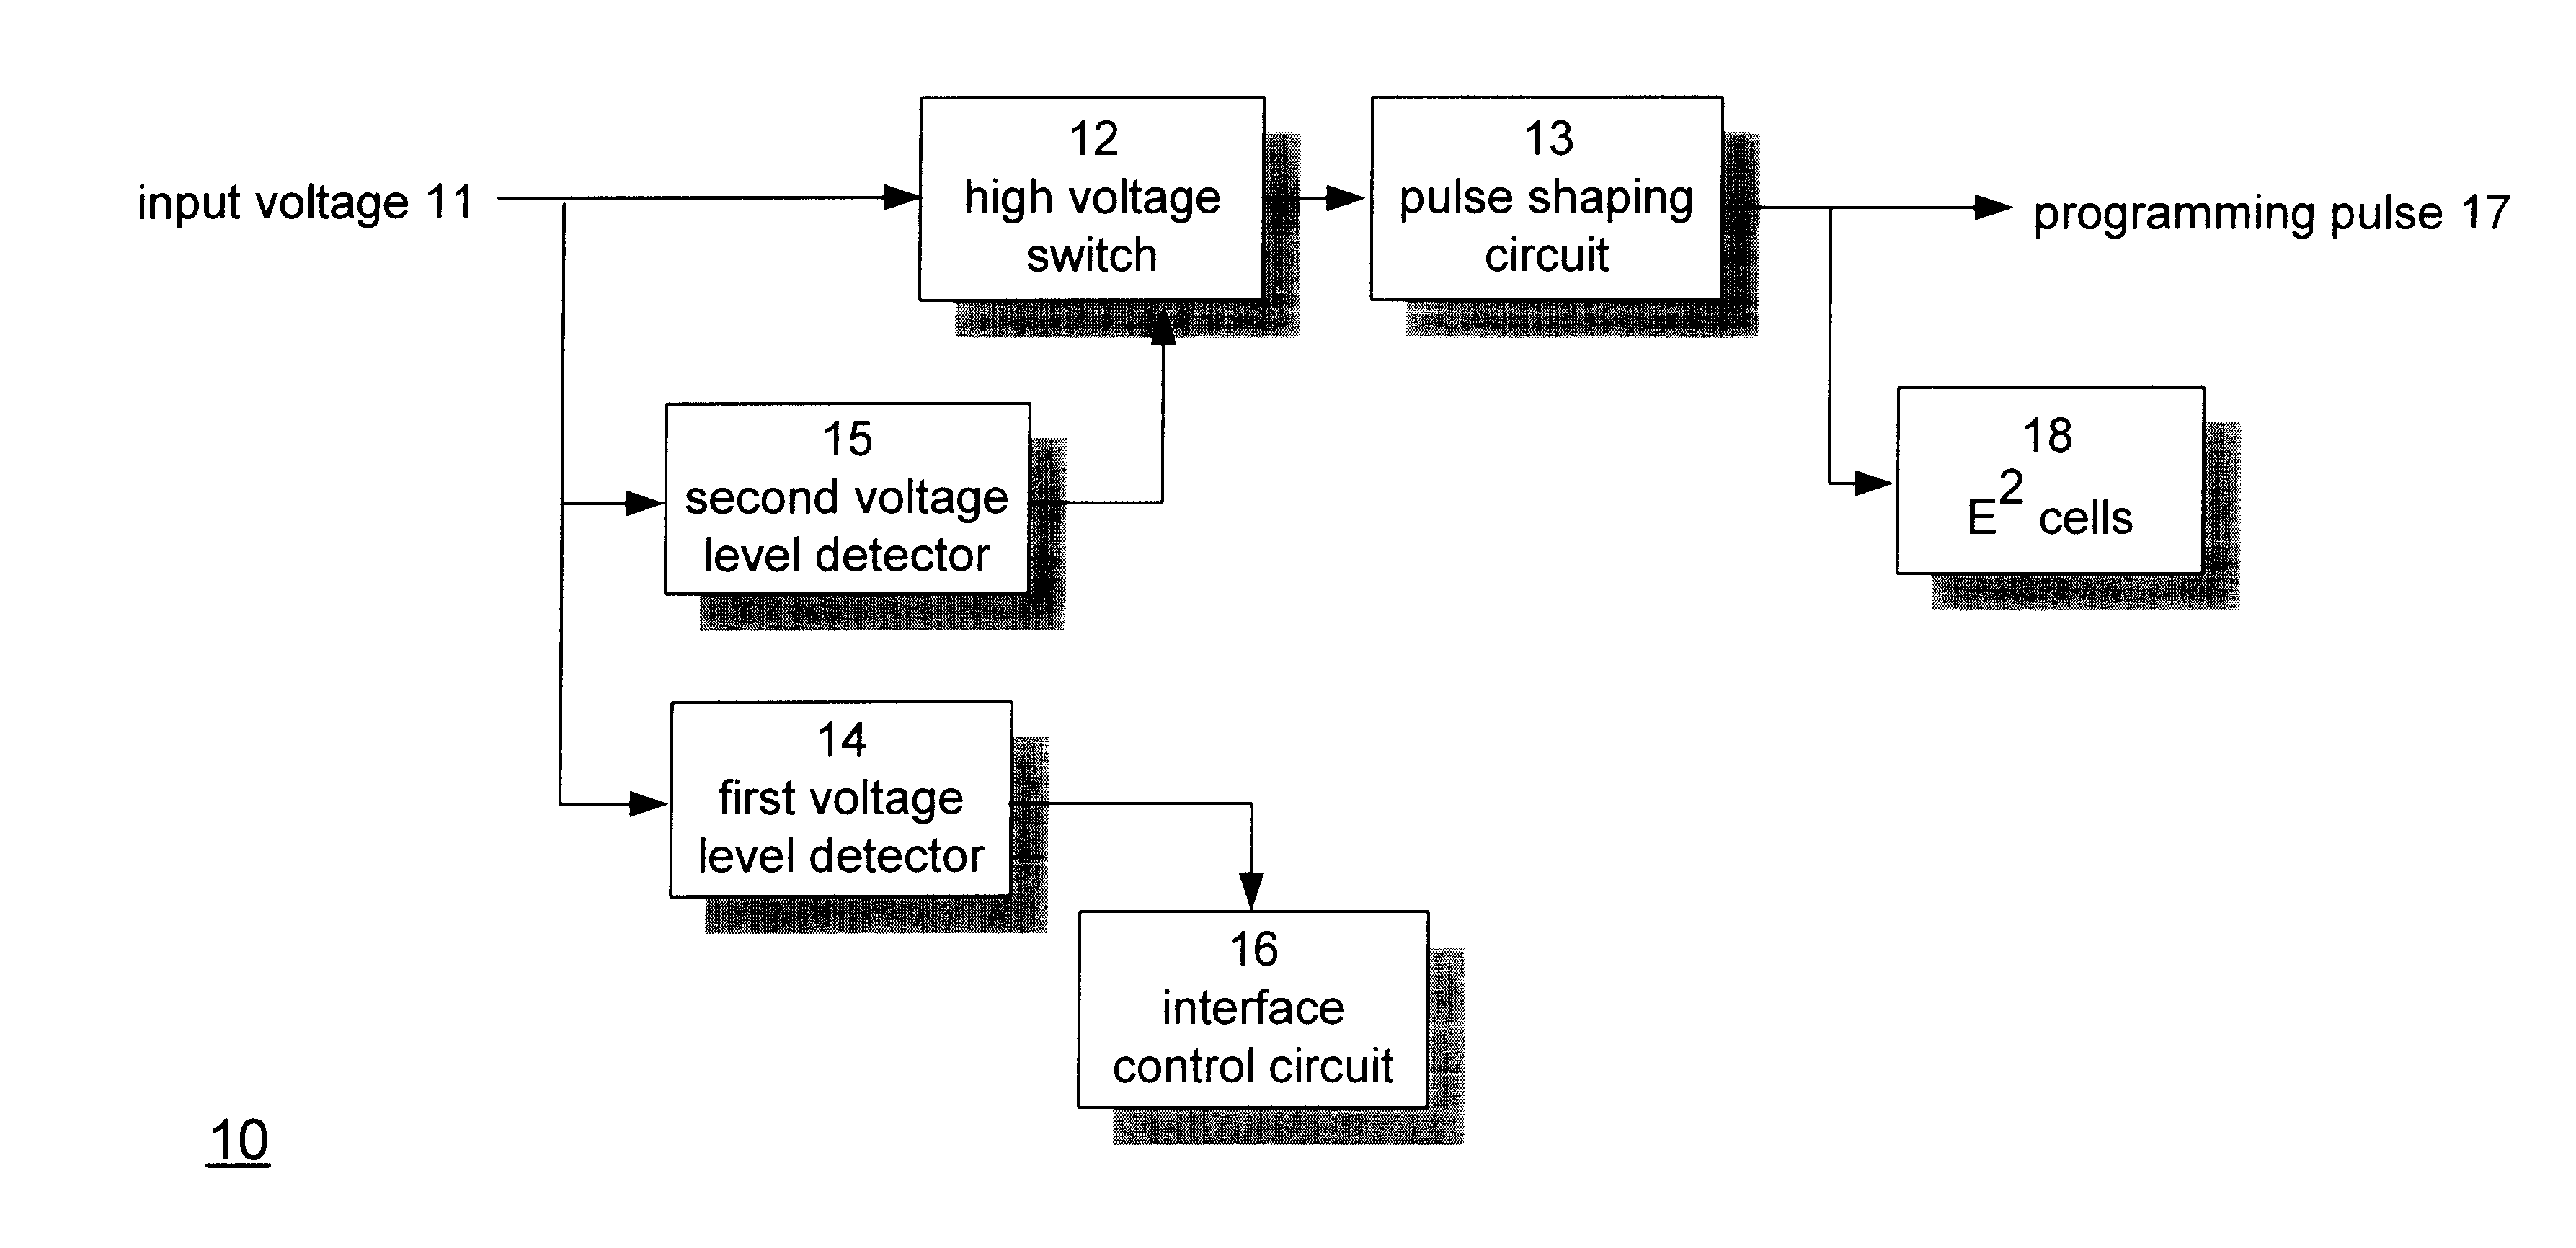 Method and system for pulse shaping in test and program modes